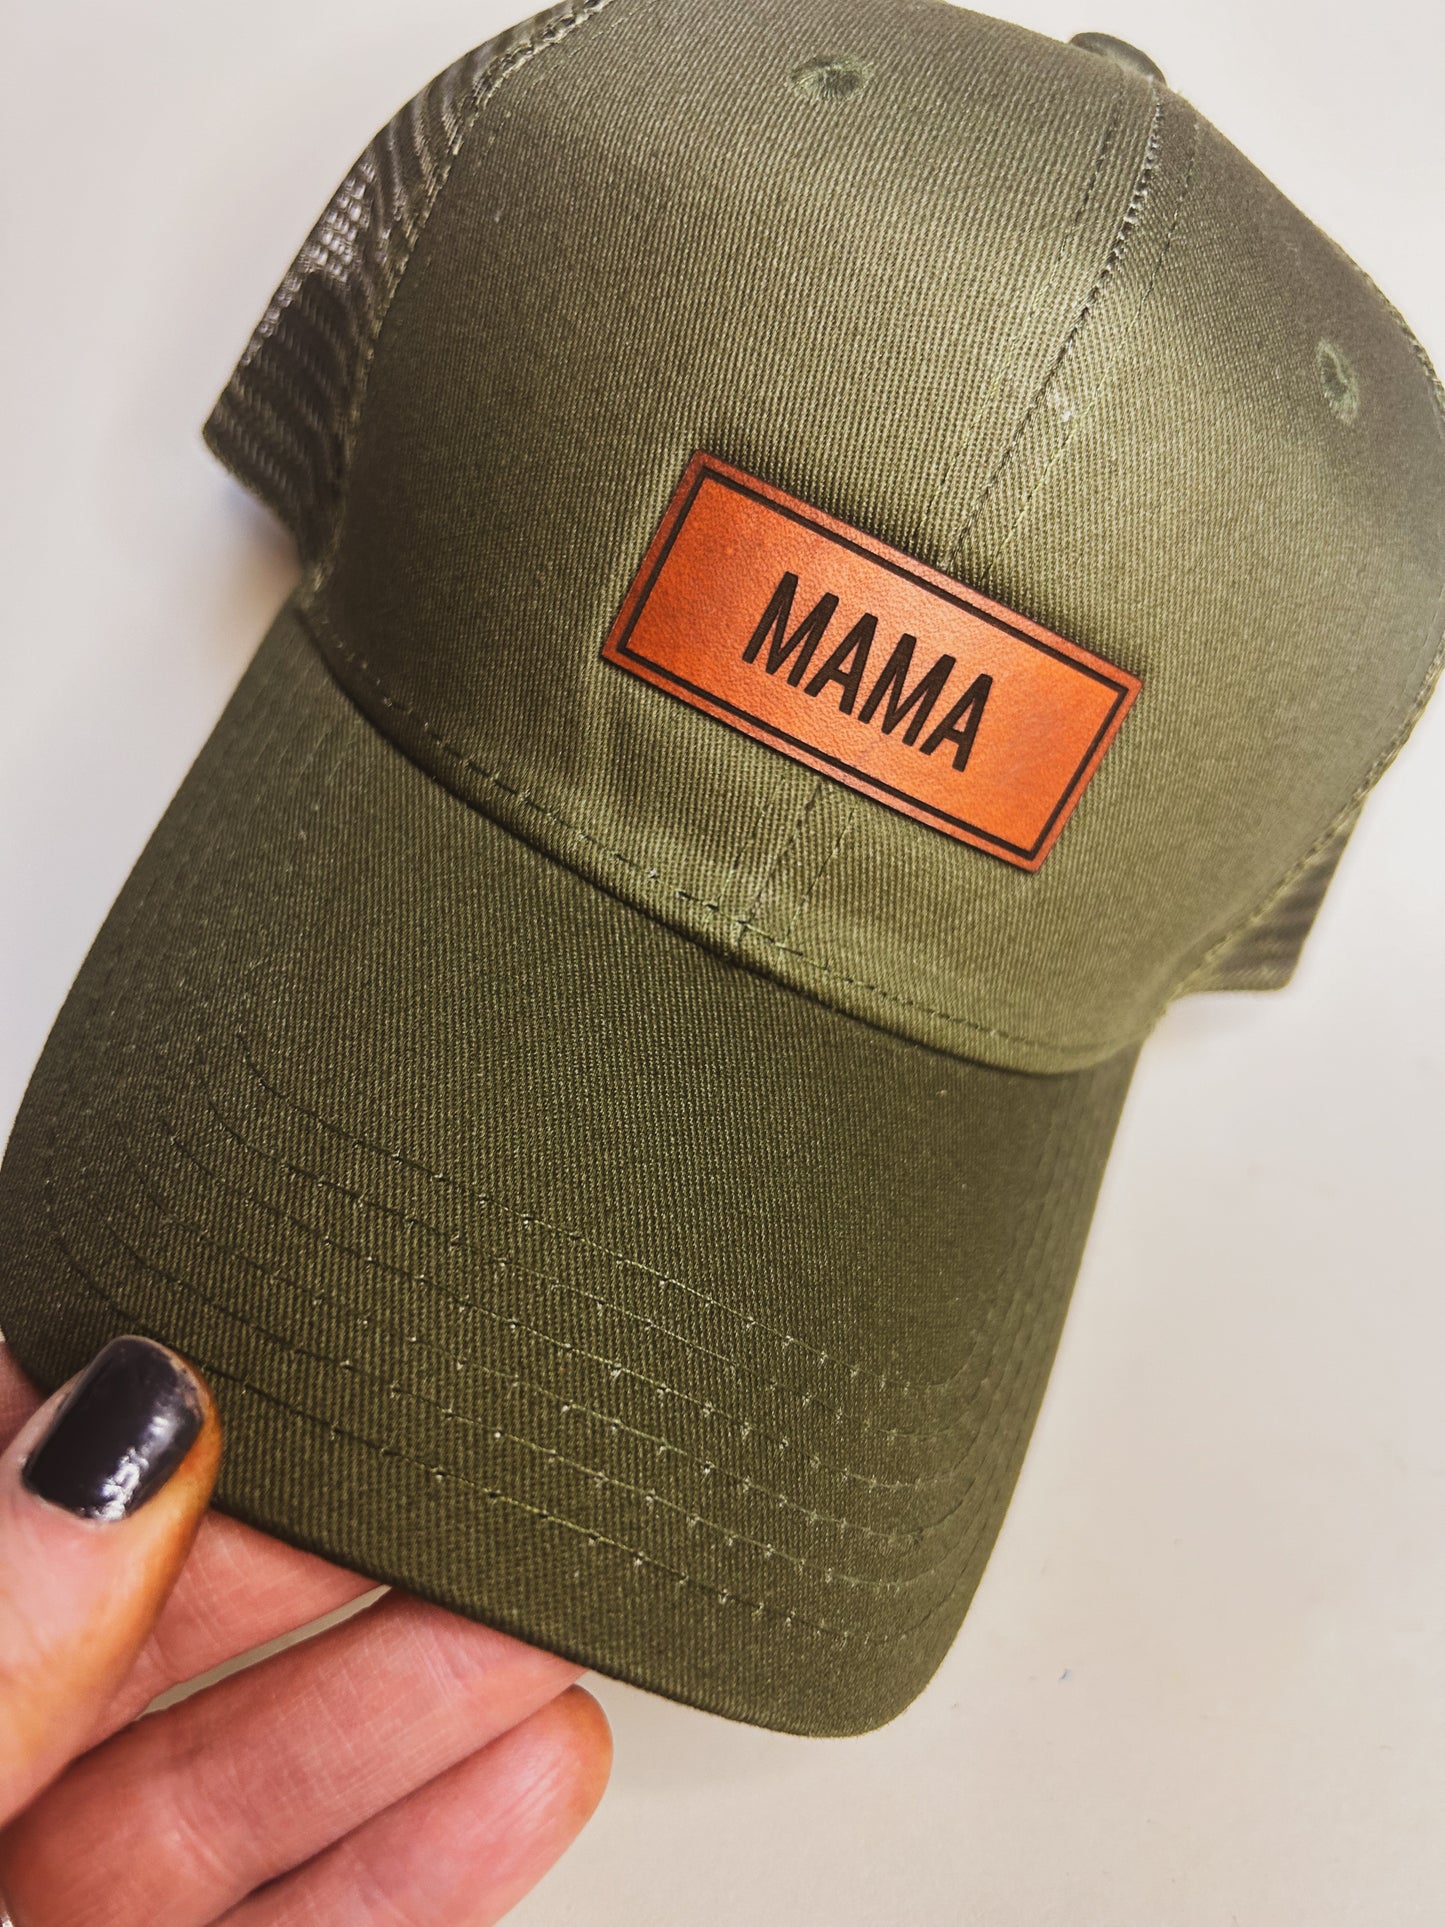 Mama Leather Patch on Olive Green Baseball Hat